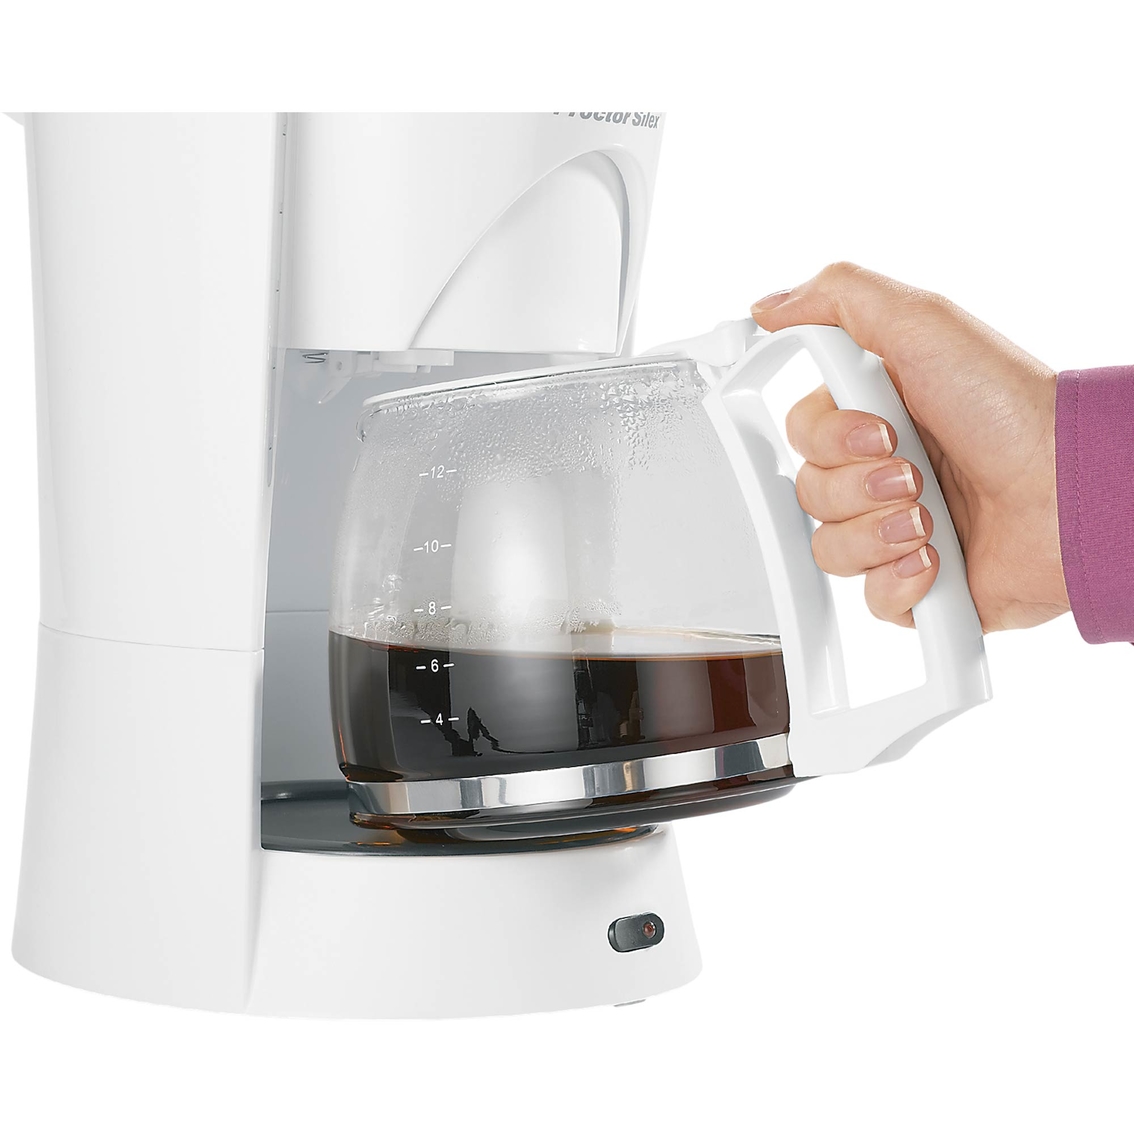 Proctor Silex 12 Cup Coffeemaker - Image 3 of 3